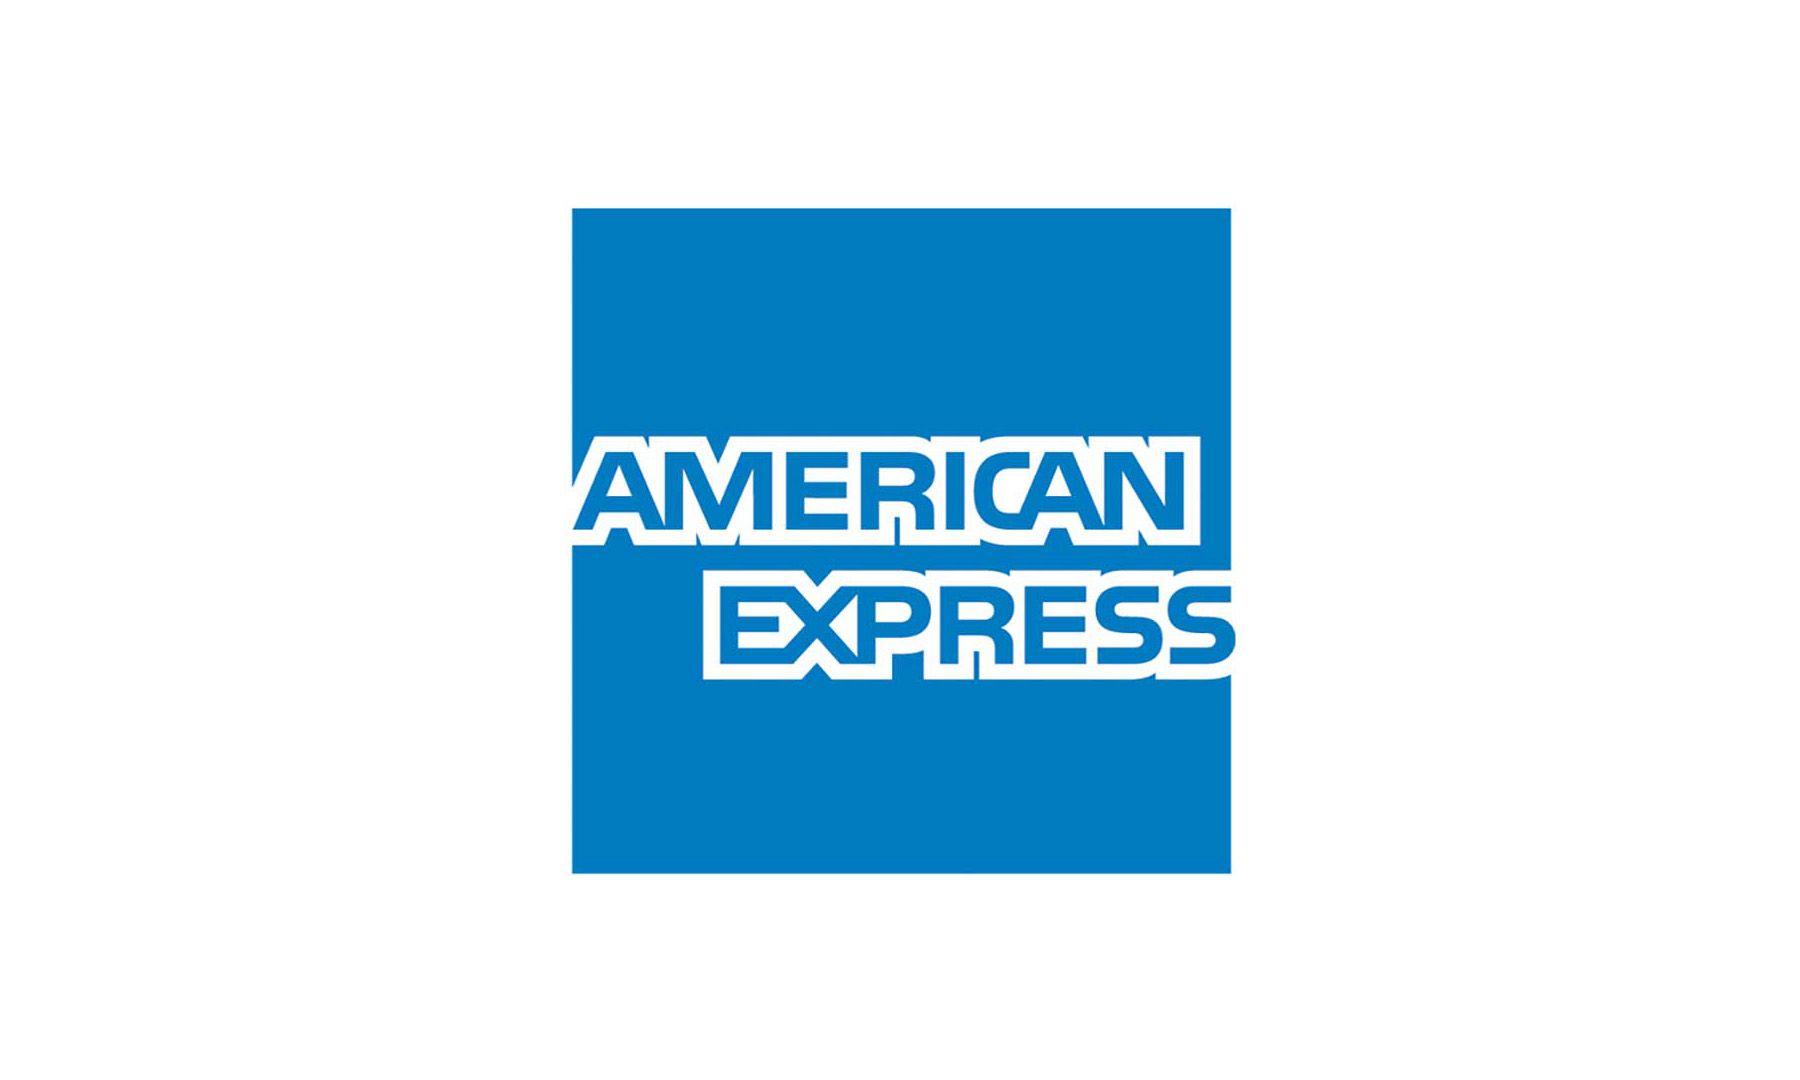 Amex Logo - Supreme Court Rules In Amex's Favor In Credit Card Fee Case